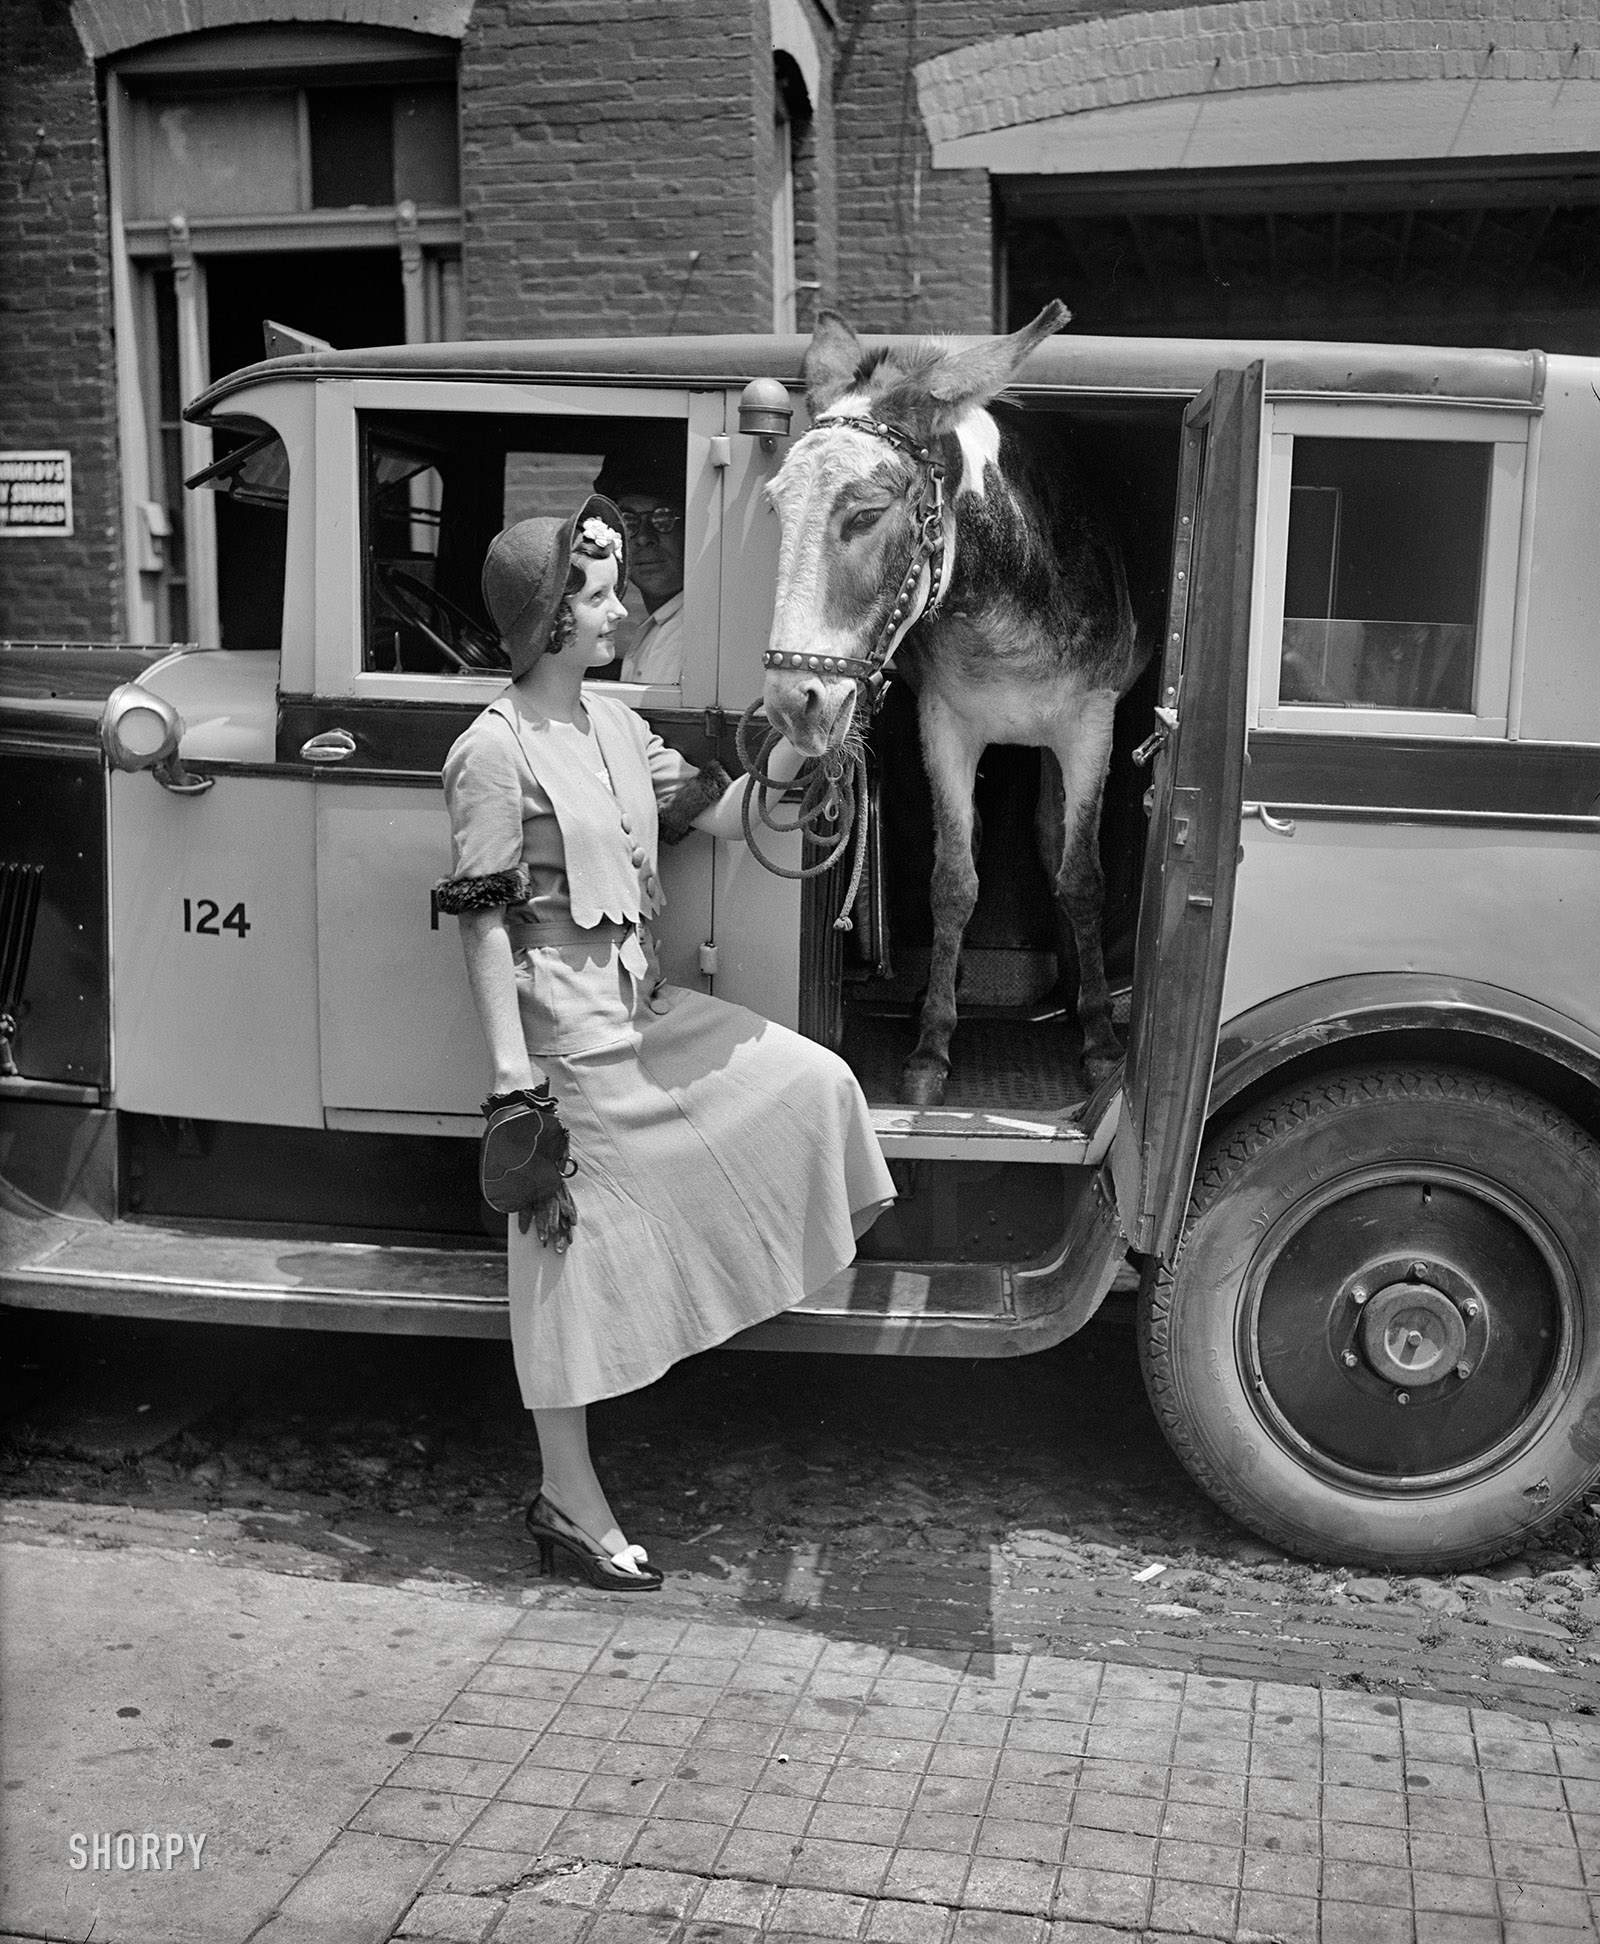 Washington, D.C., 1931. "Woman with donkey in taxicab." For anyone who's ever been instructed to "get your a__ over here RIGHT NOW," here's one possible solution. Harris & Ewing Collection glass negative. View full size.